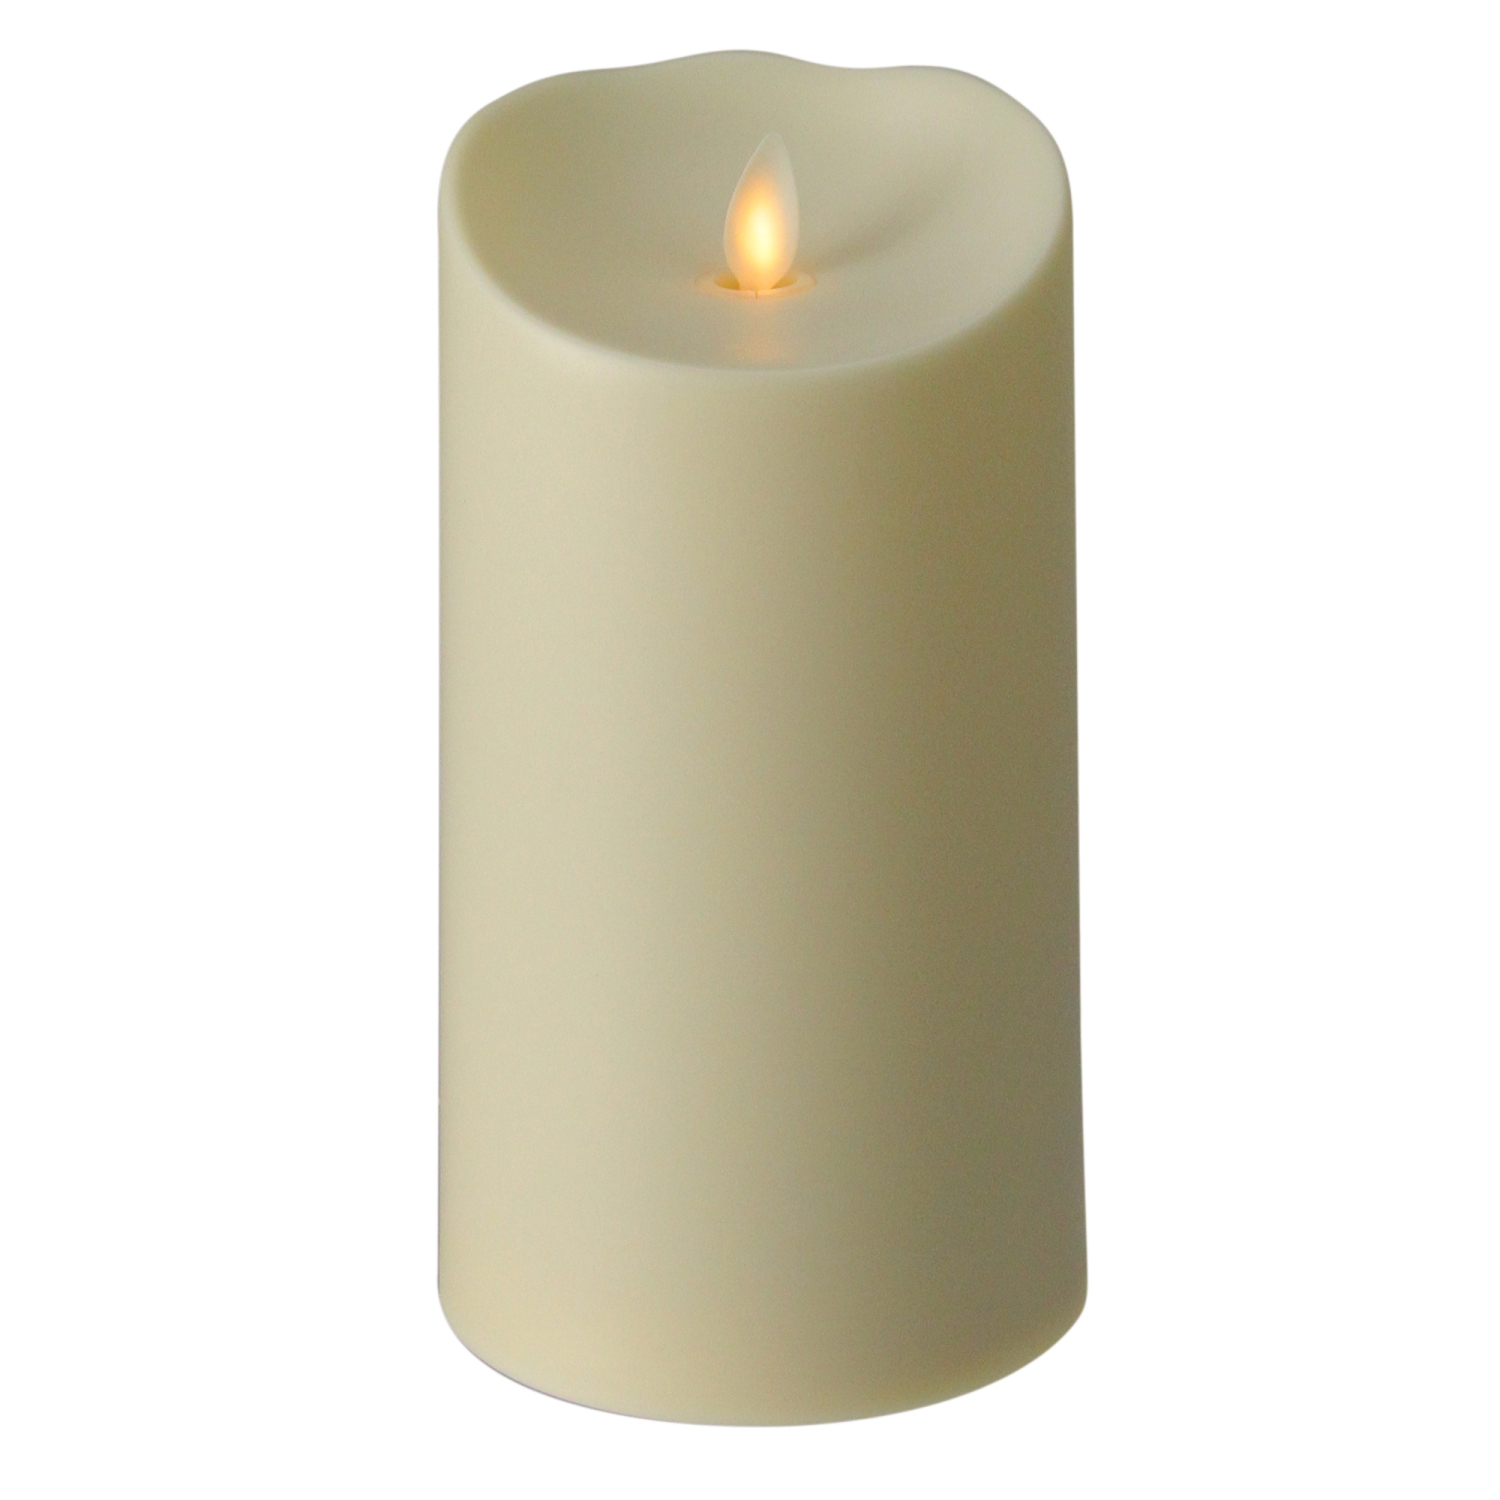 7" Off-White Luminara Flickering Flameless LED Lighted Outdoor Pillar Candle